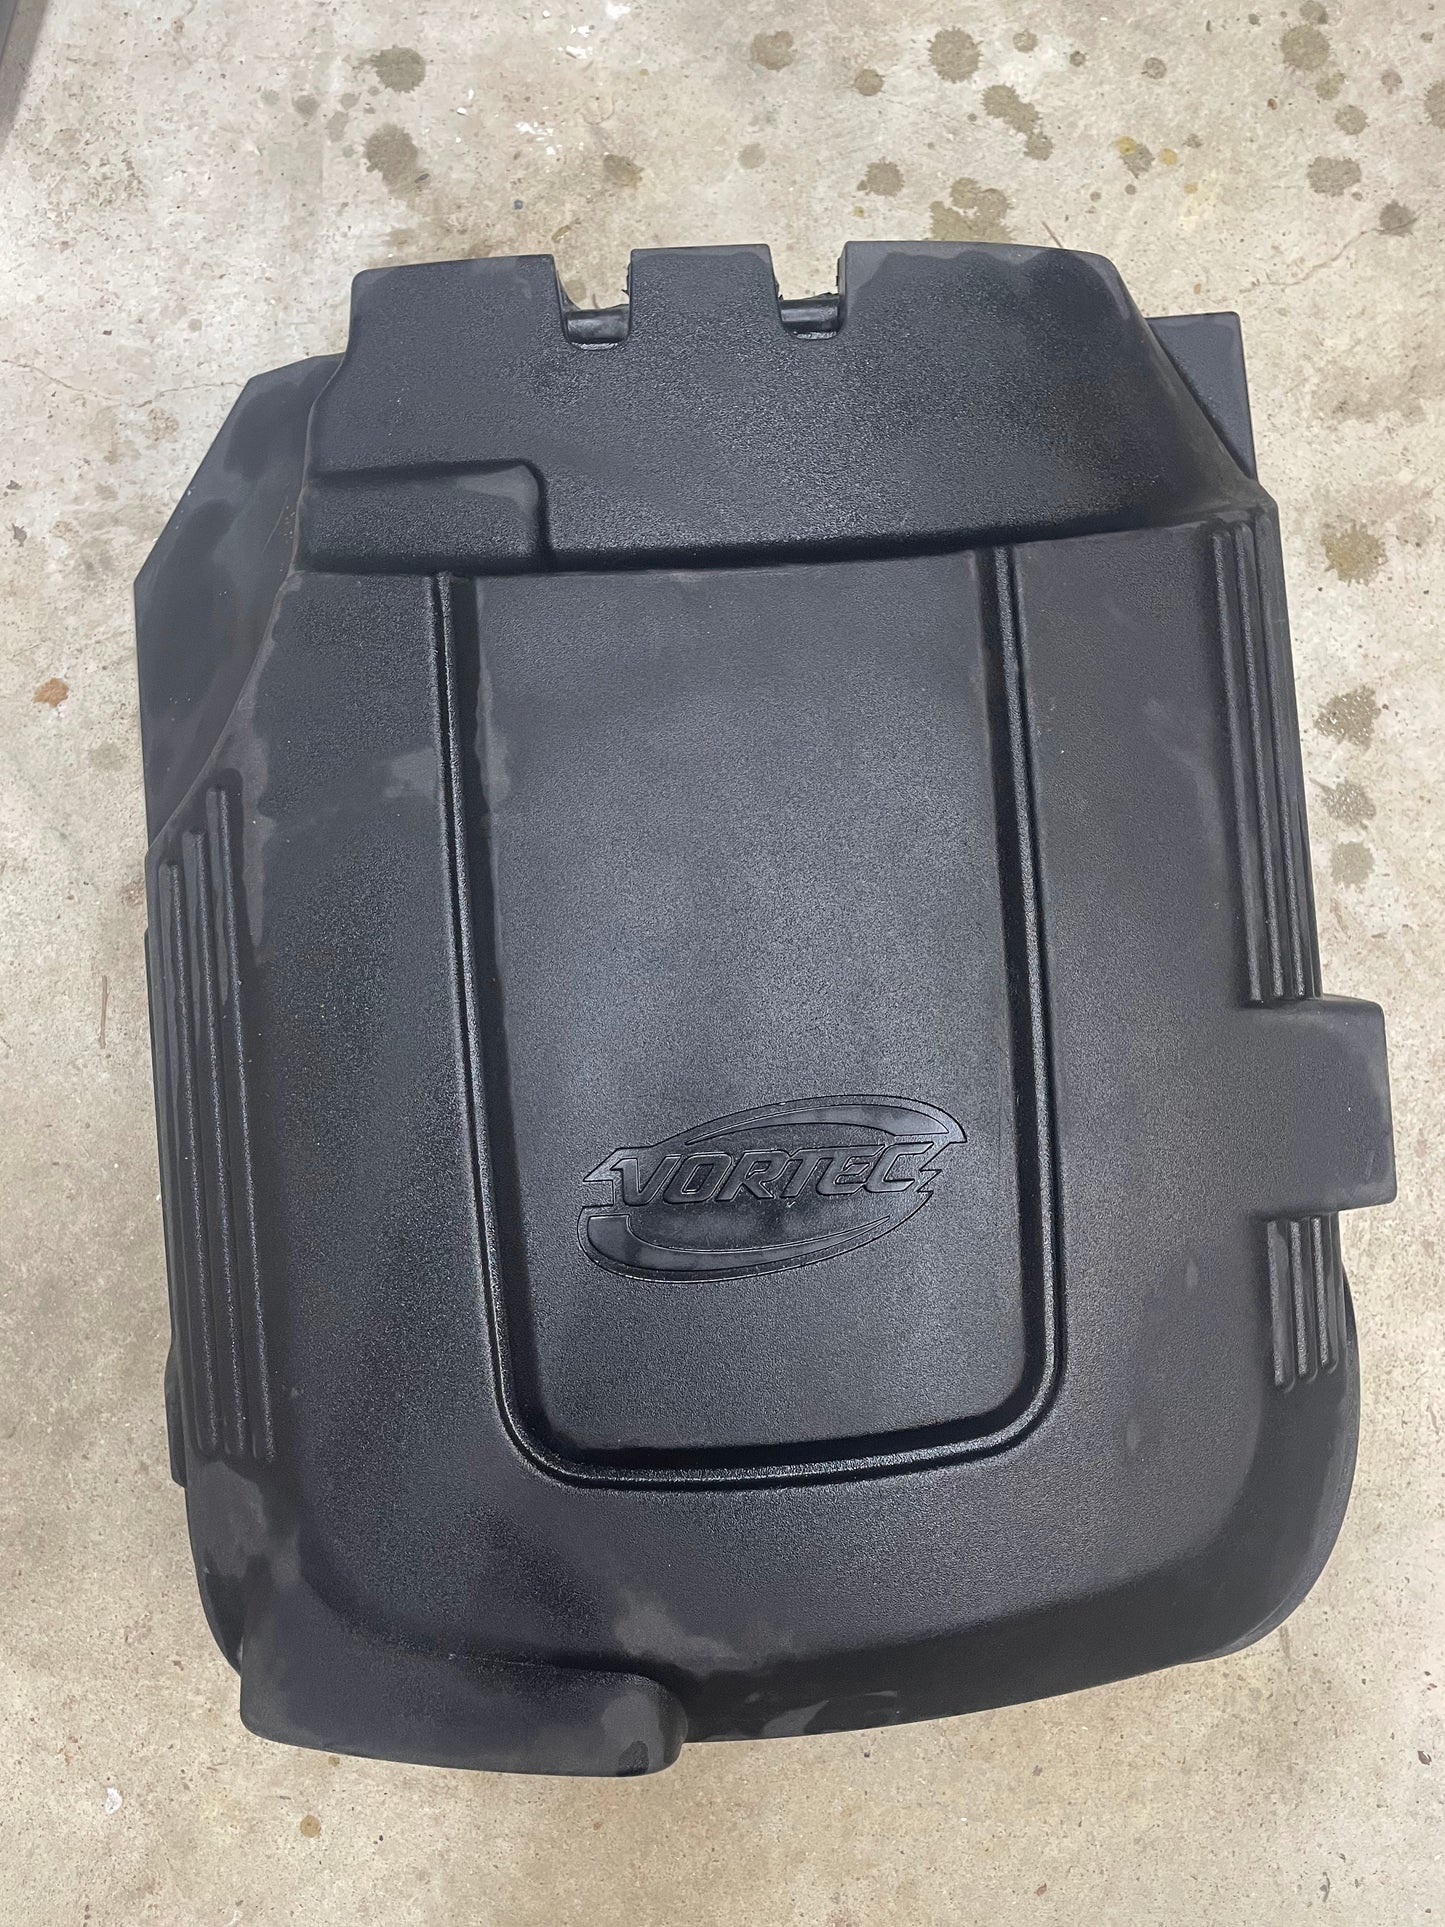 OEM Vortec Engine Intake Cover for 2007-2019 GM Trucks and LS Swaps